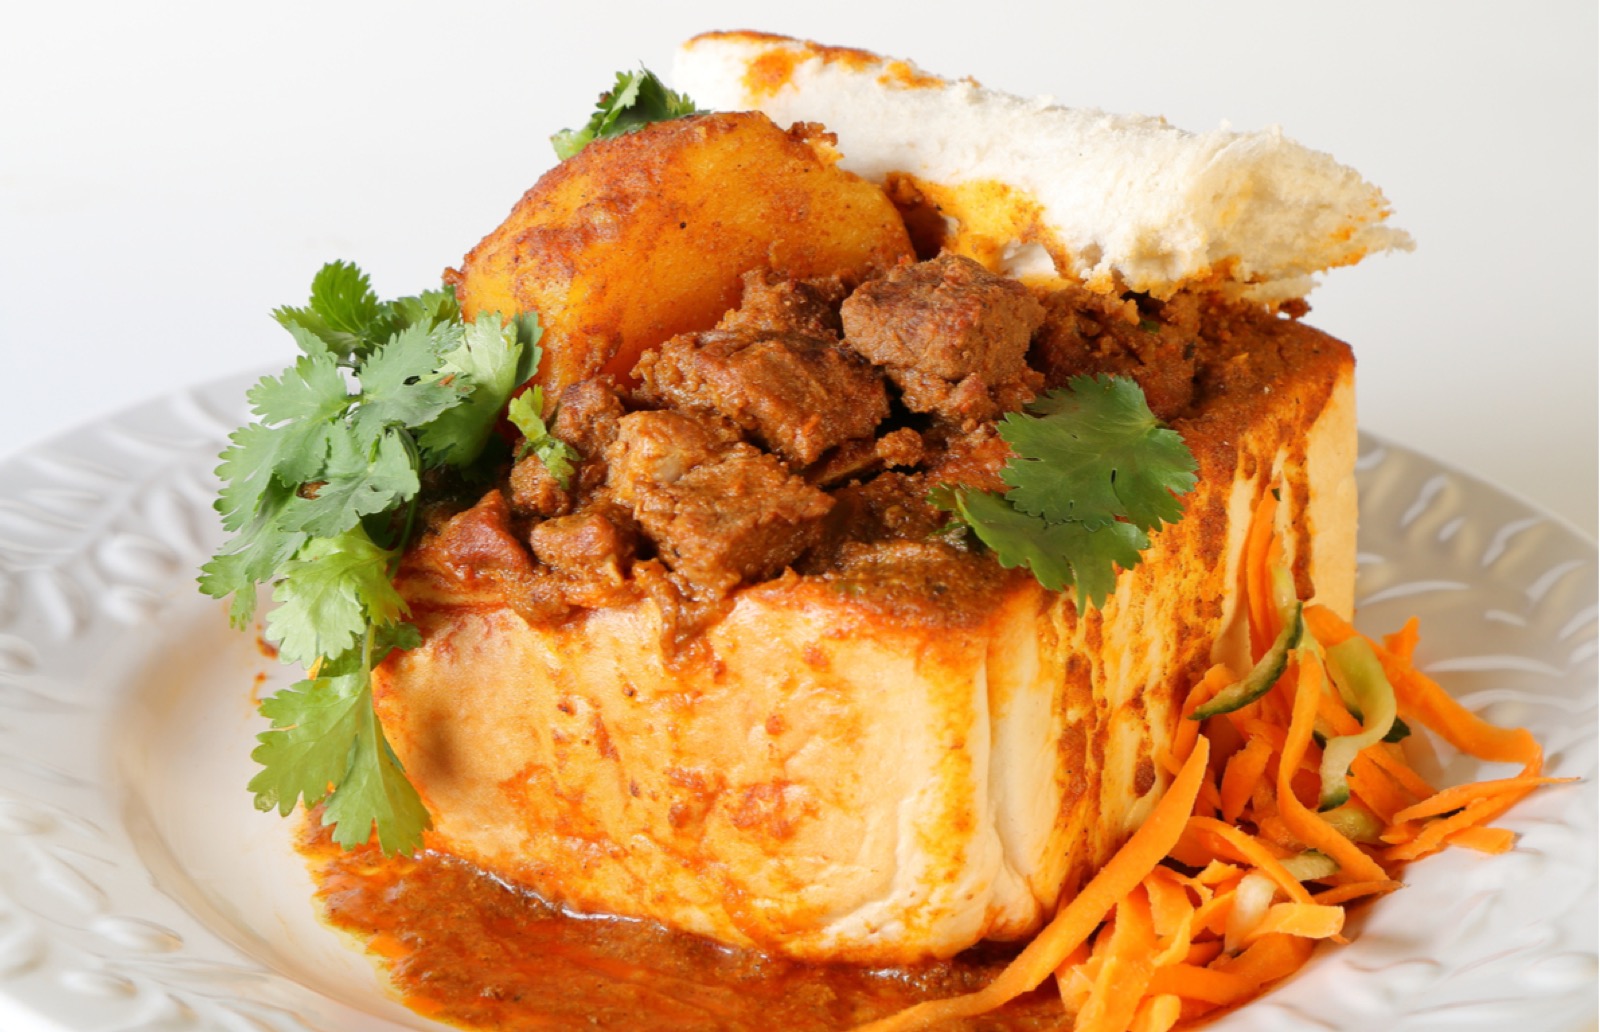 🌭 Here Are 24 Street Foods Around the World – Can You Match Them to Their Continent? Bunny Chow (South Africa)